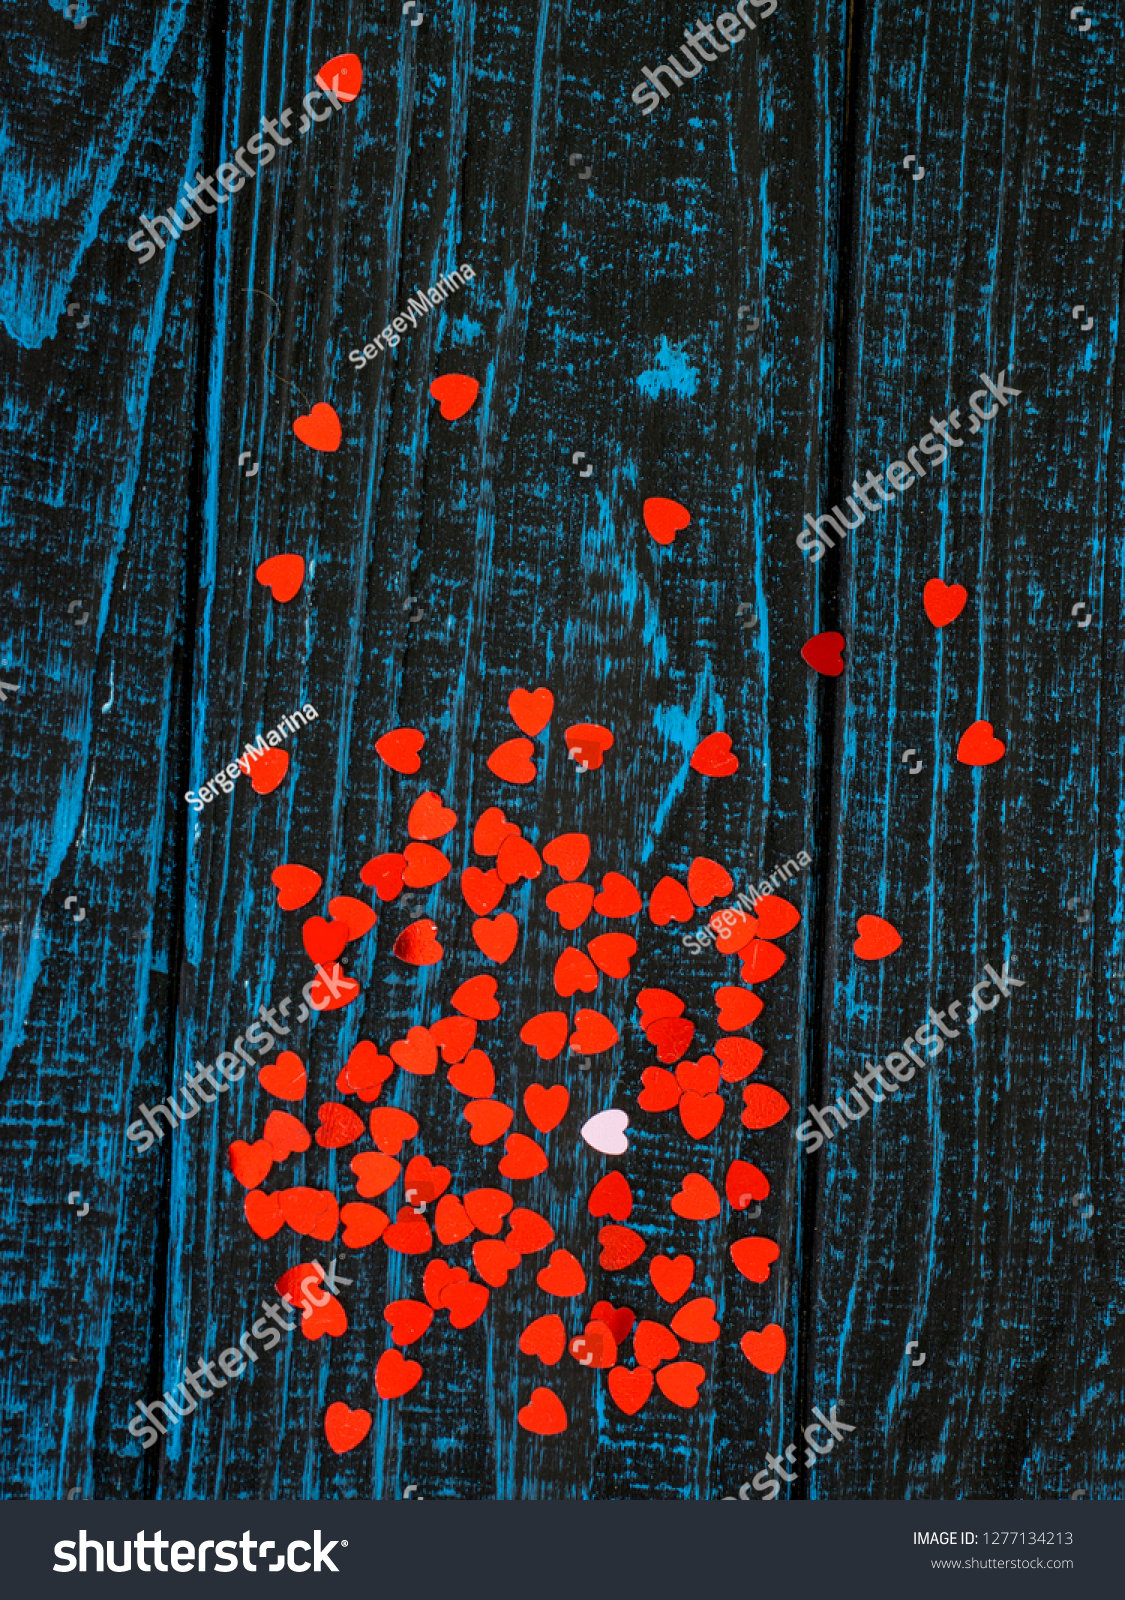 bright red hearts on blue background #1277134213